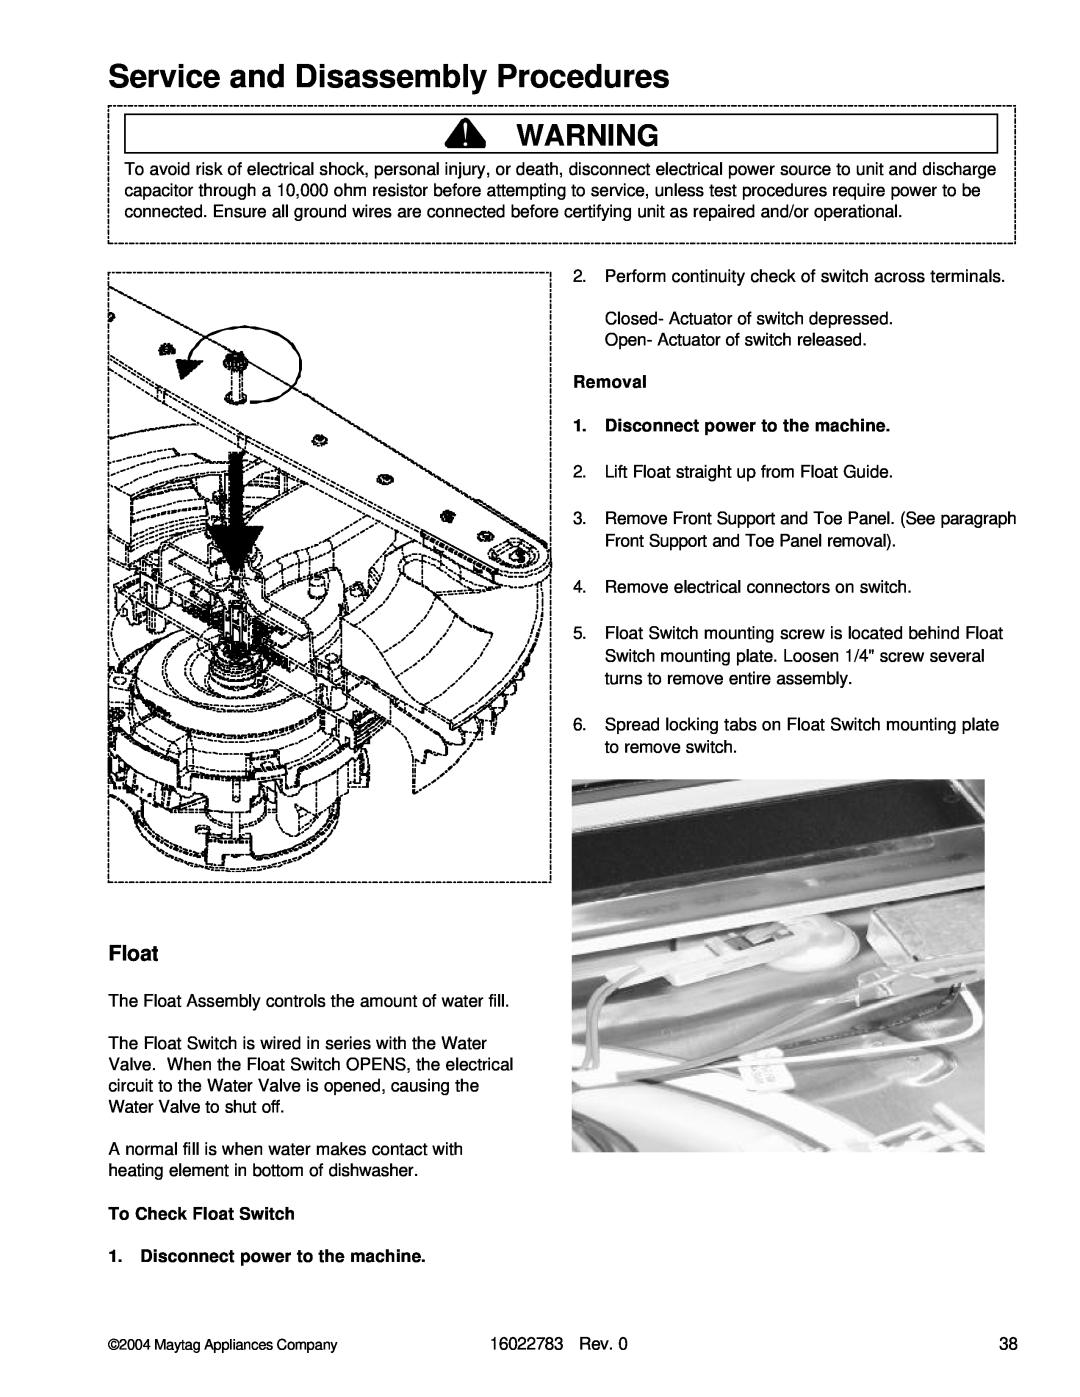 Maytag JDB2150AWP manual To Check Float Switch 1. Disconnect power to the machine, Service and Disassembly Procedures 